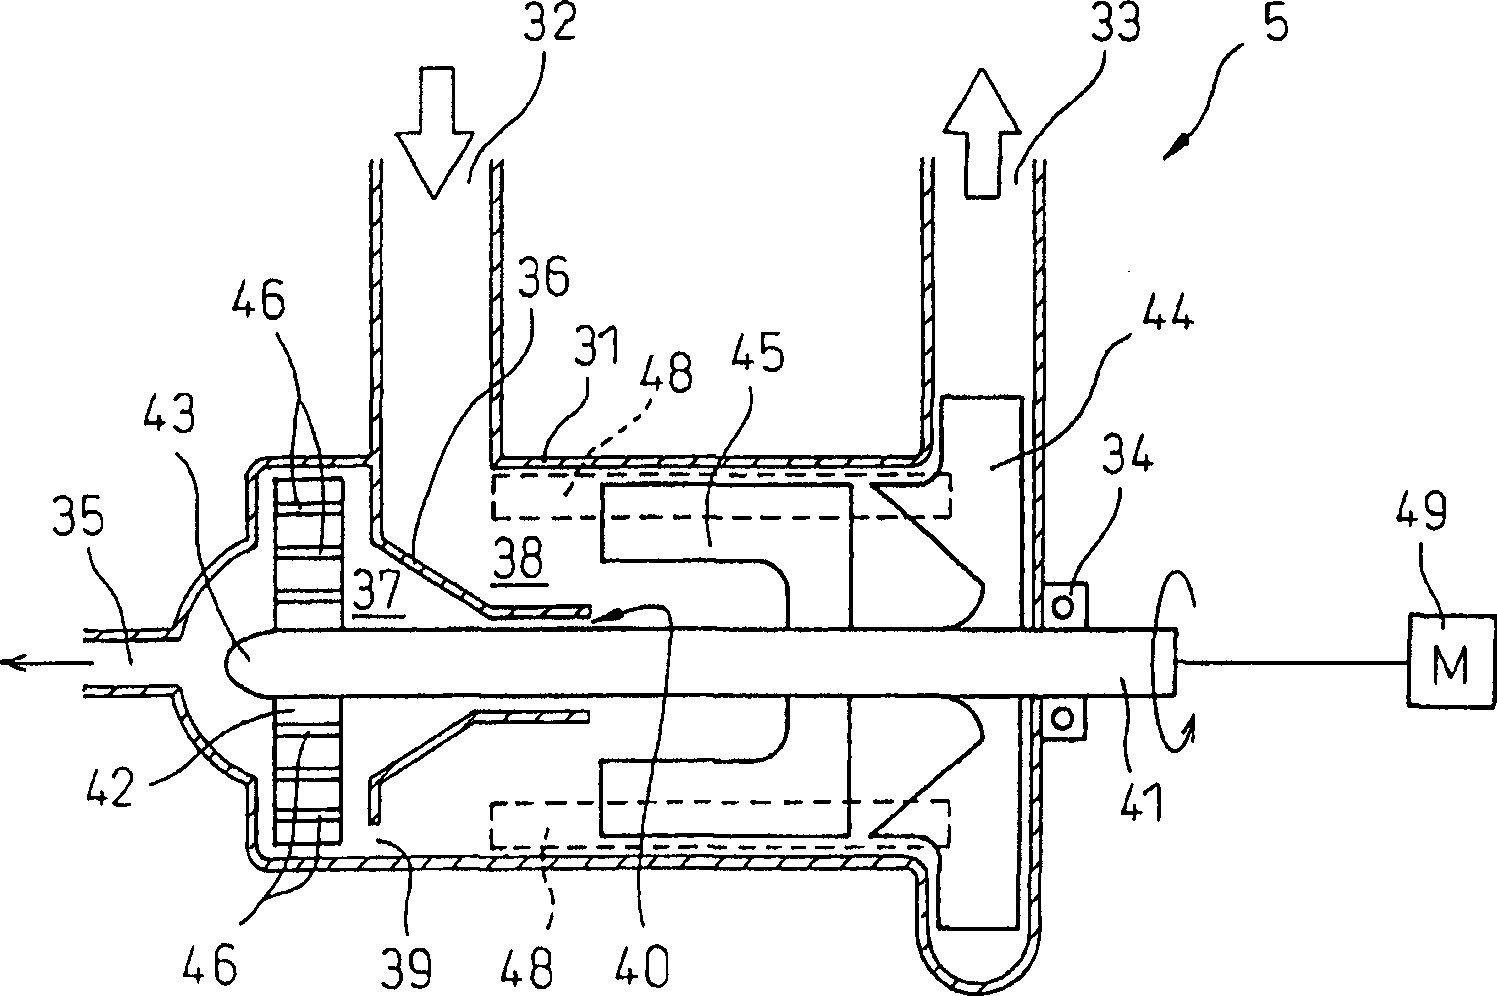 Method and apparatus for manufacturing beverage